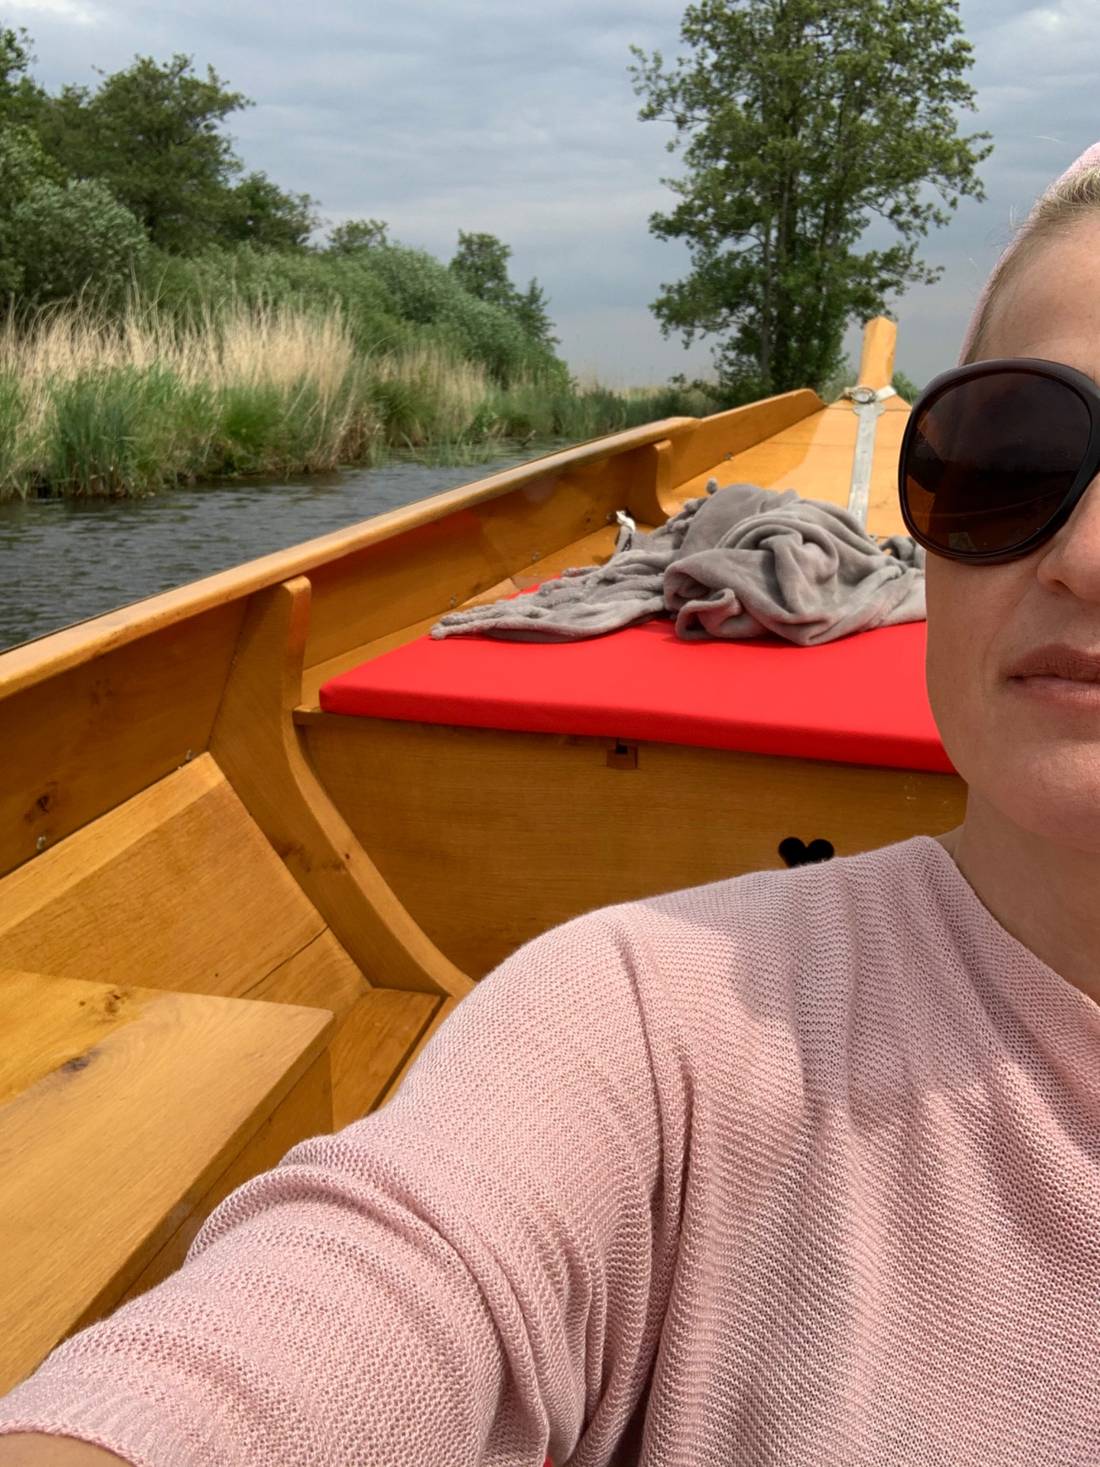 * It was sunny but with a bit of wind so I had to wear a sweater in the boat